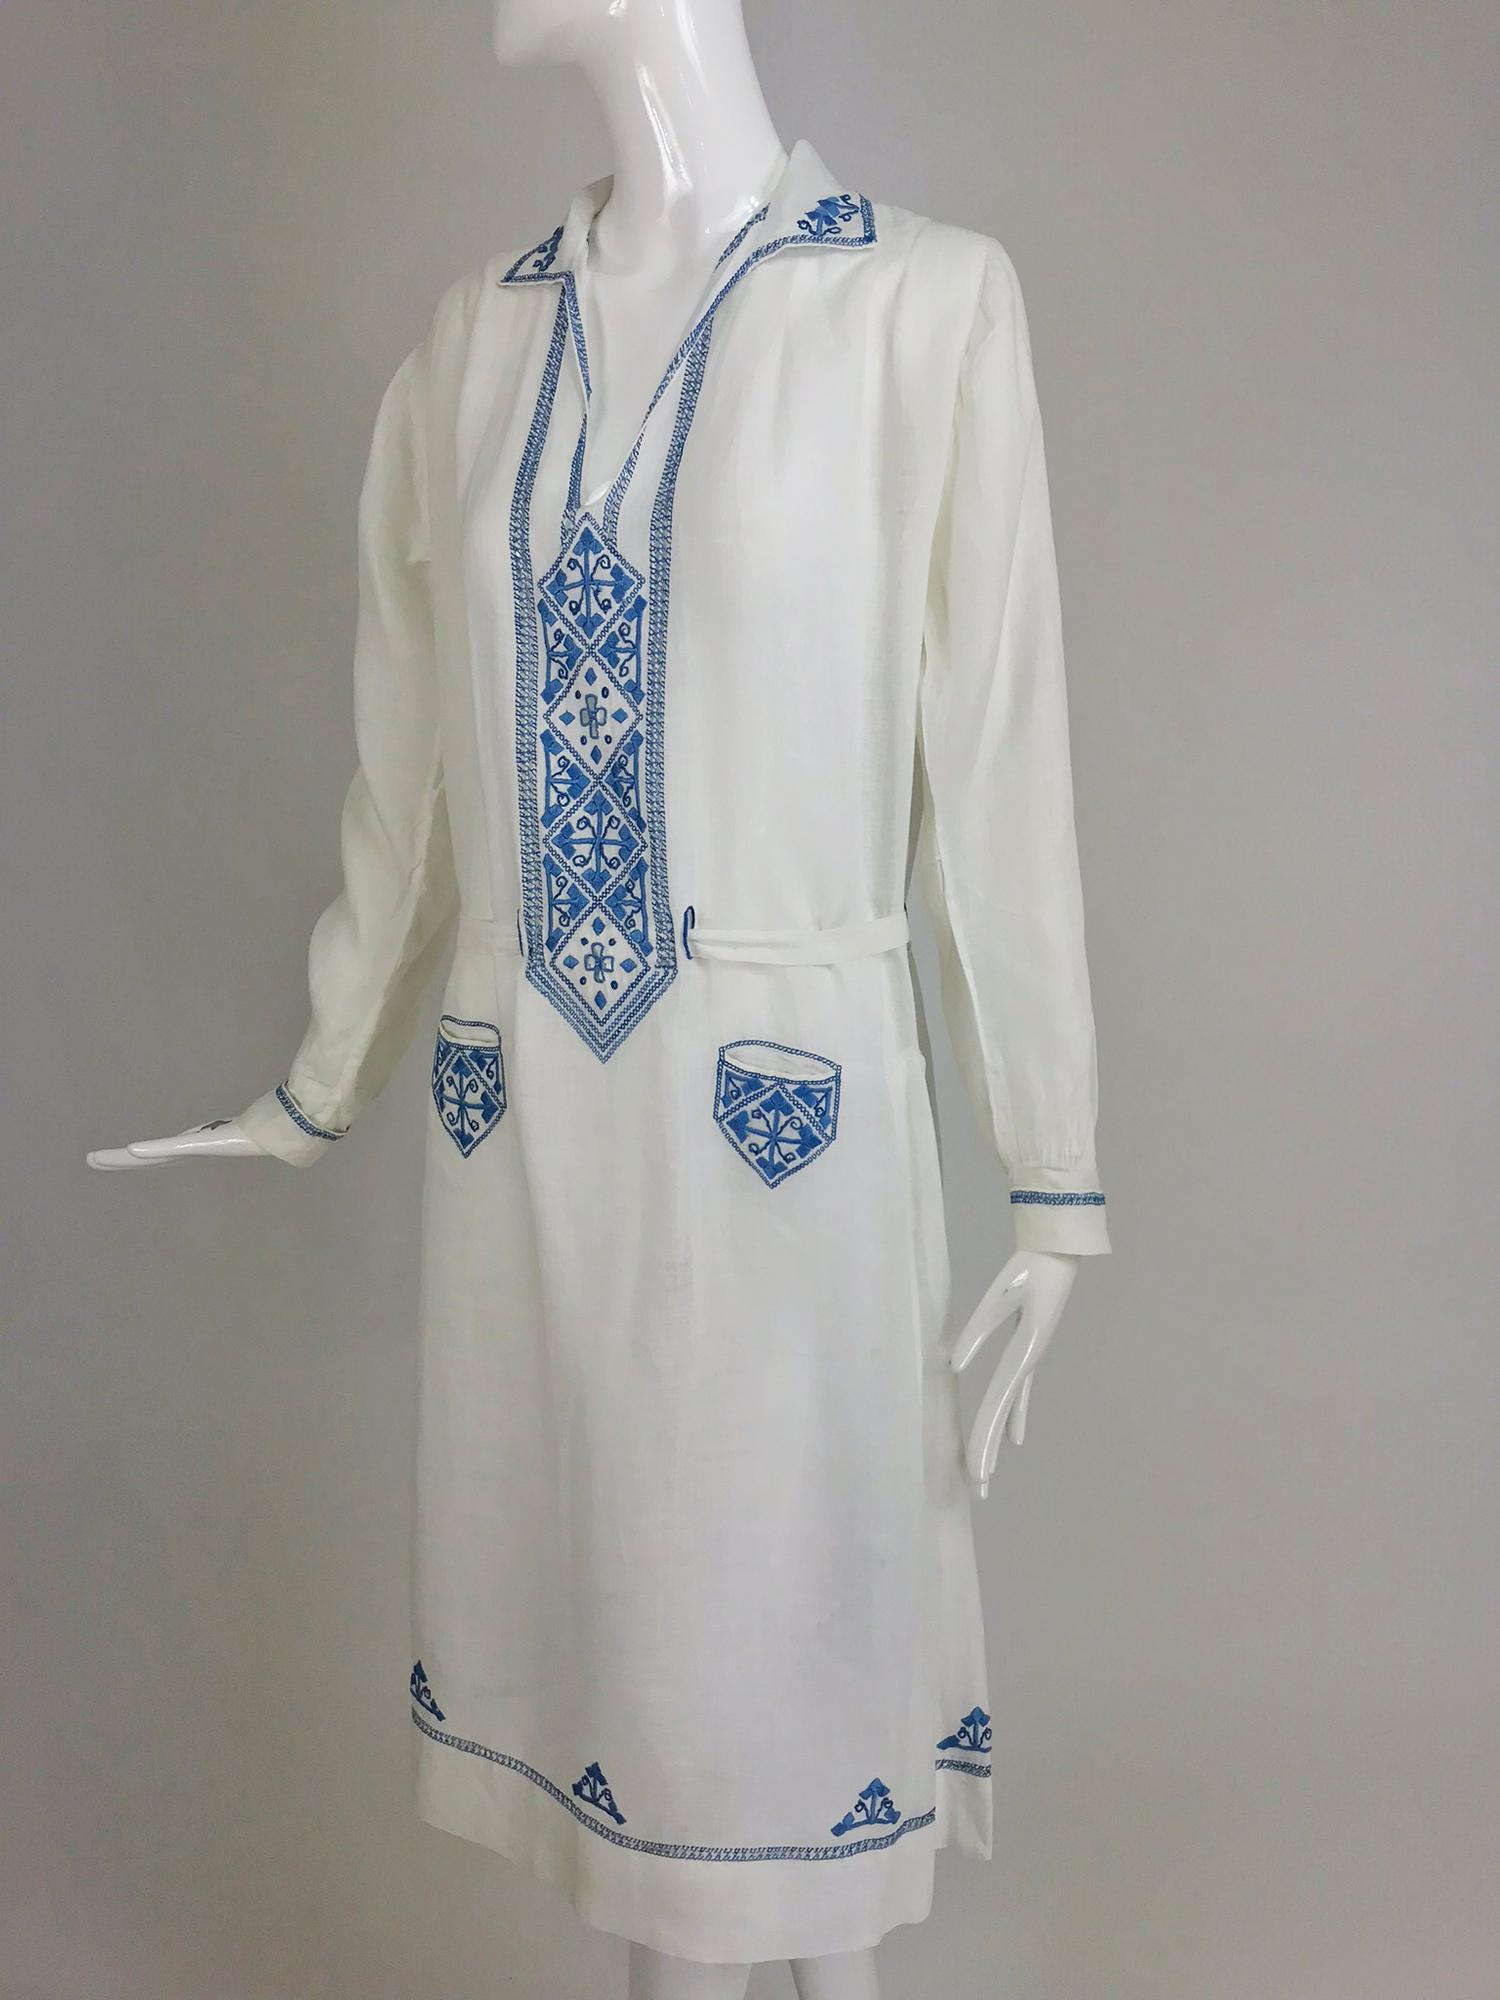 1920s arts and crafts embroidered blue and white linen day dress. This is such an amazing example of the ethnic trend of early 20th century women's fashion worn by artists and the avant garde, this style was beautifully hand embellished, loose and